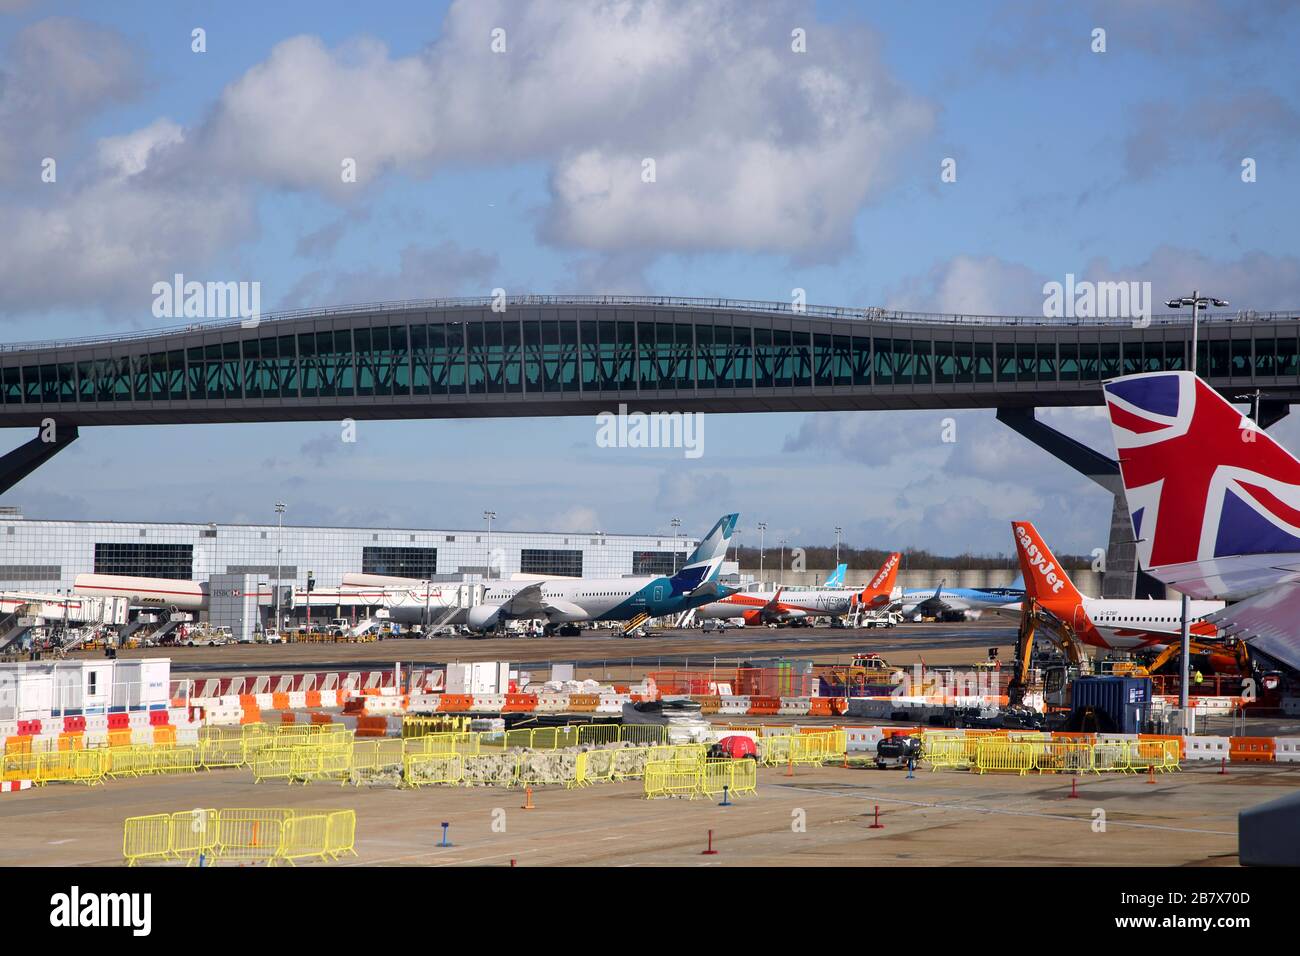 Gatwick Airport England Air Bridge Connecting North Terminal to Pier 6 Stock Photo